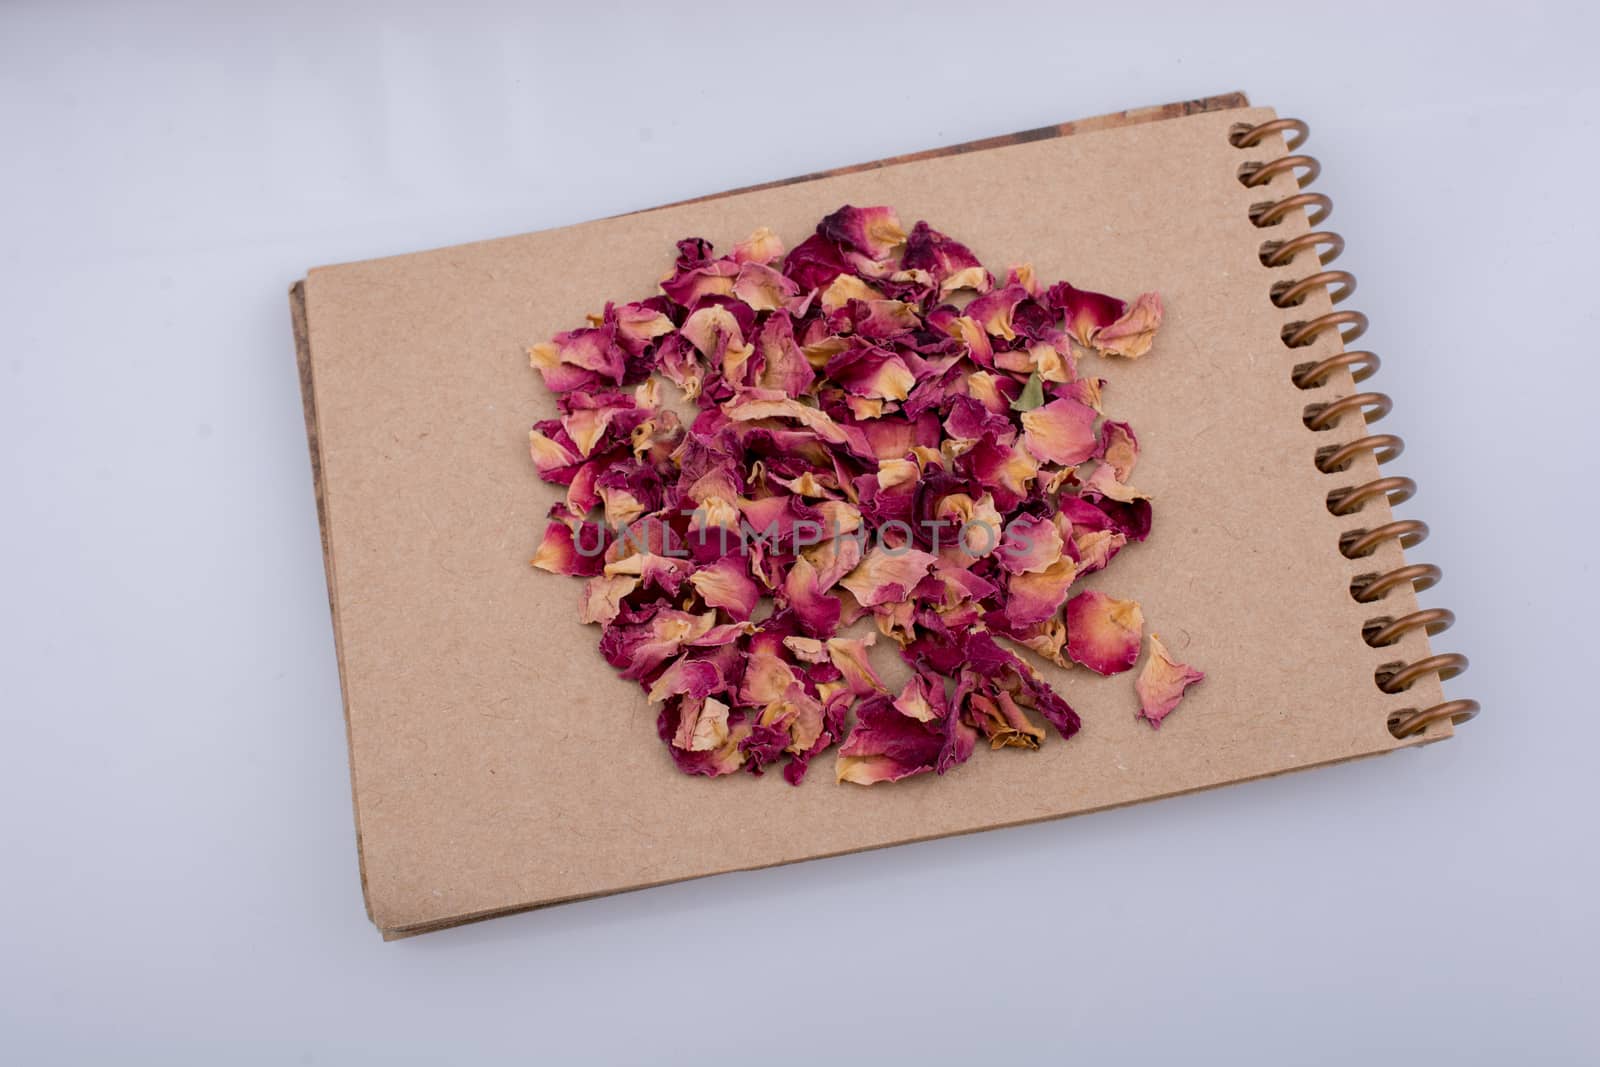 Dry  rose petals  on a spiral notebook by berkay